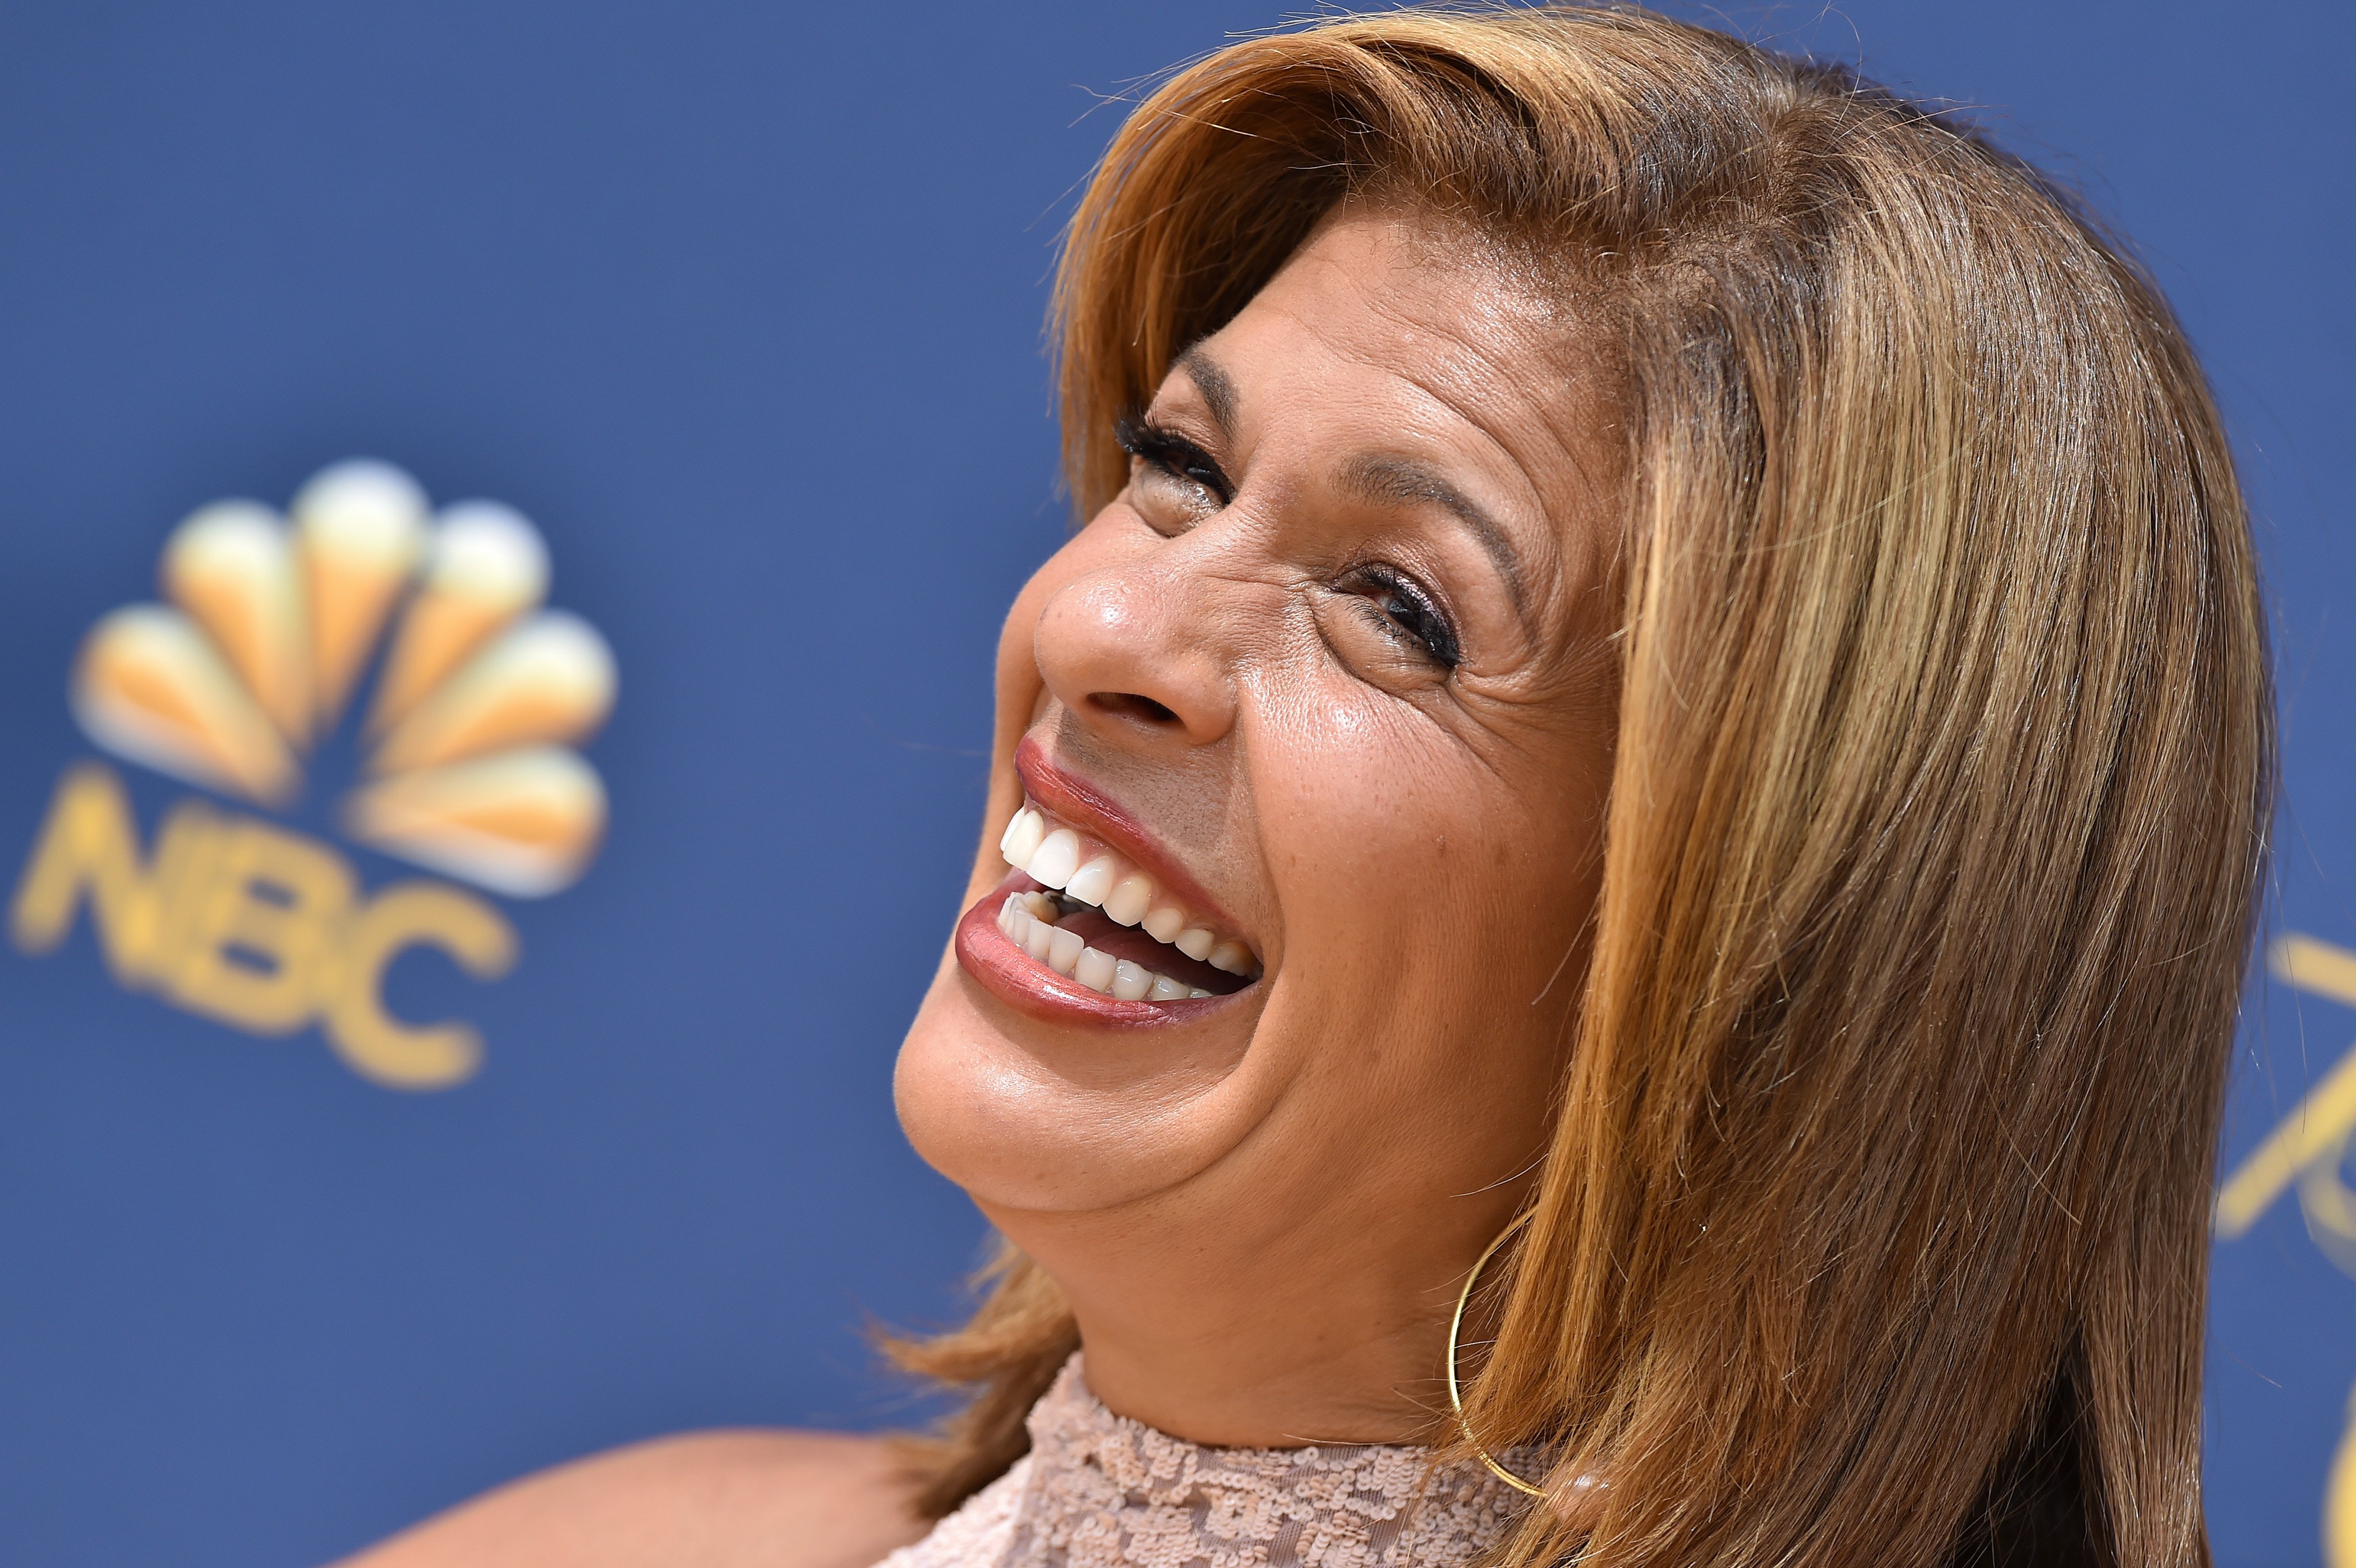 Hoda Kotb attends the 70th Emmy Awards at Microsoft Theater on September 17, 2018 in Los Angeles, California. | Source: Getty Images